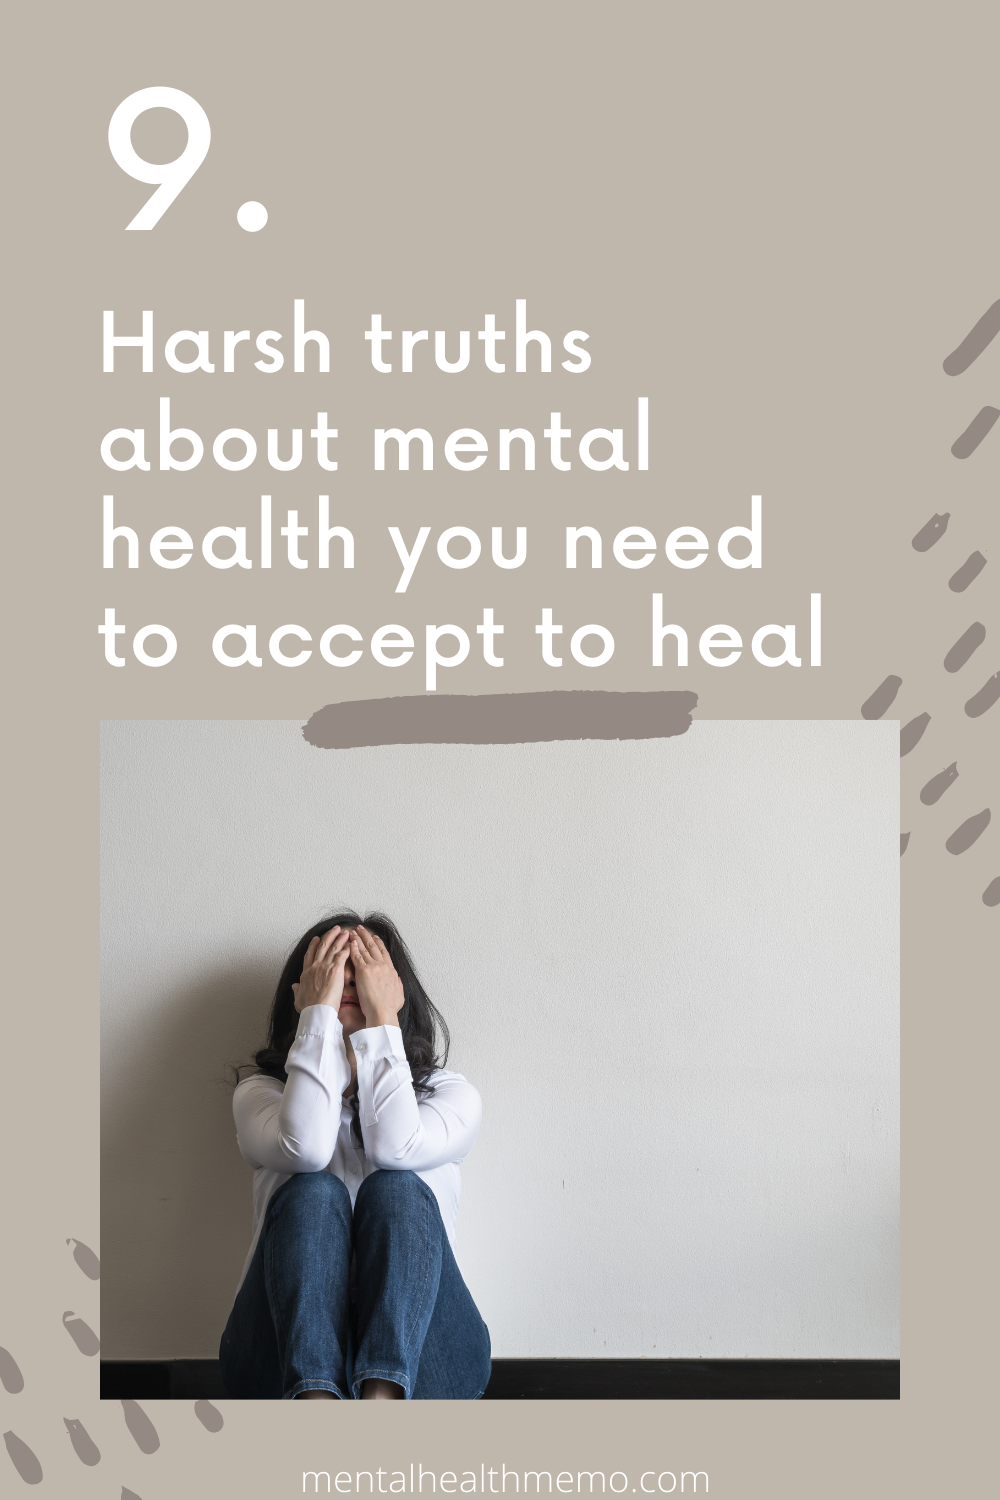 Pin: harsh truths about mental health you need to accept